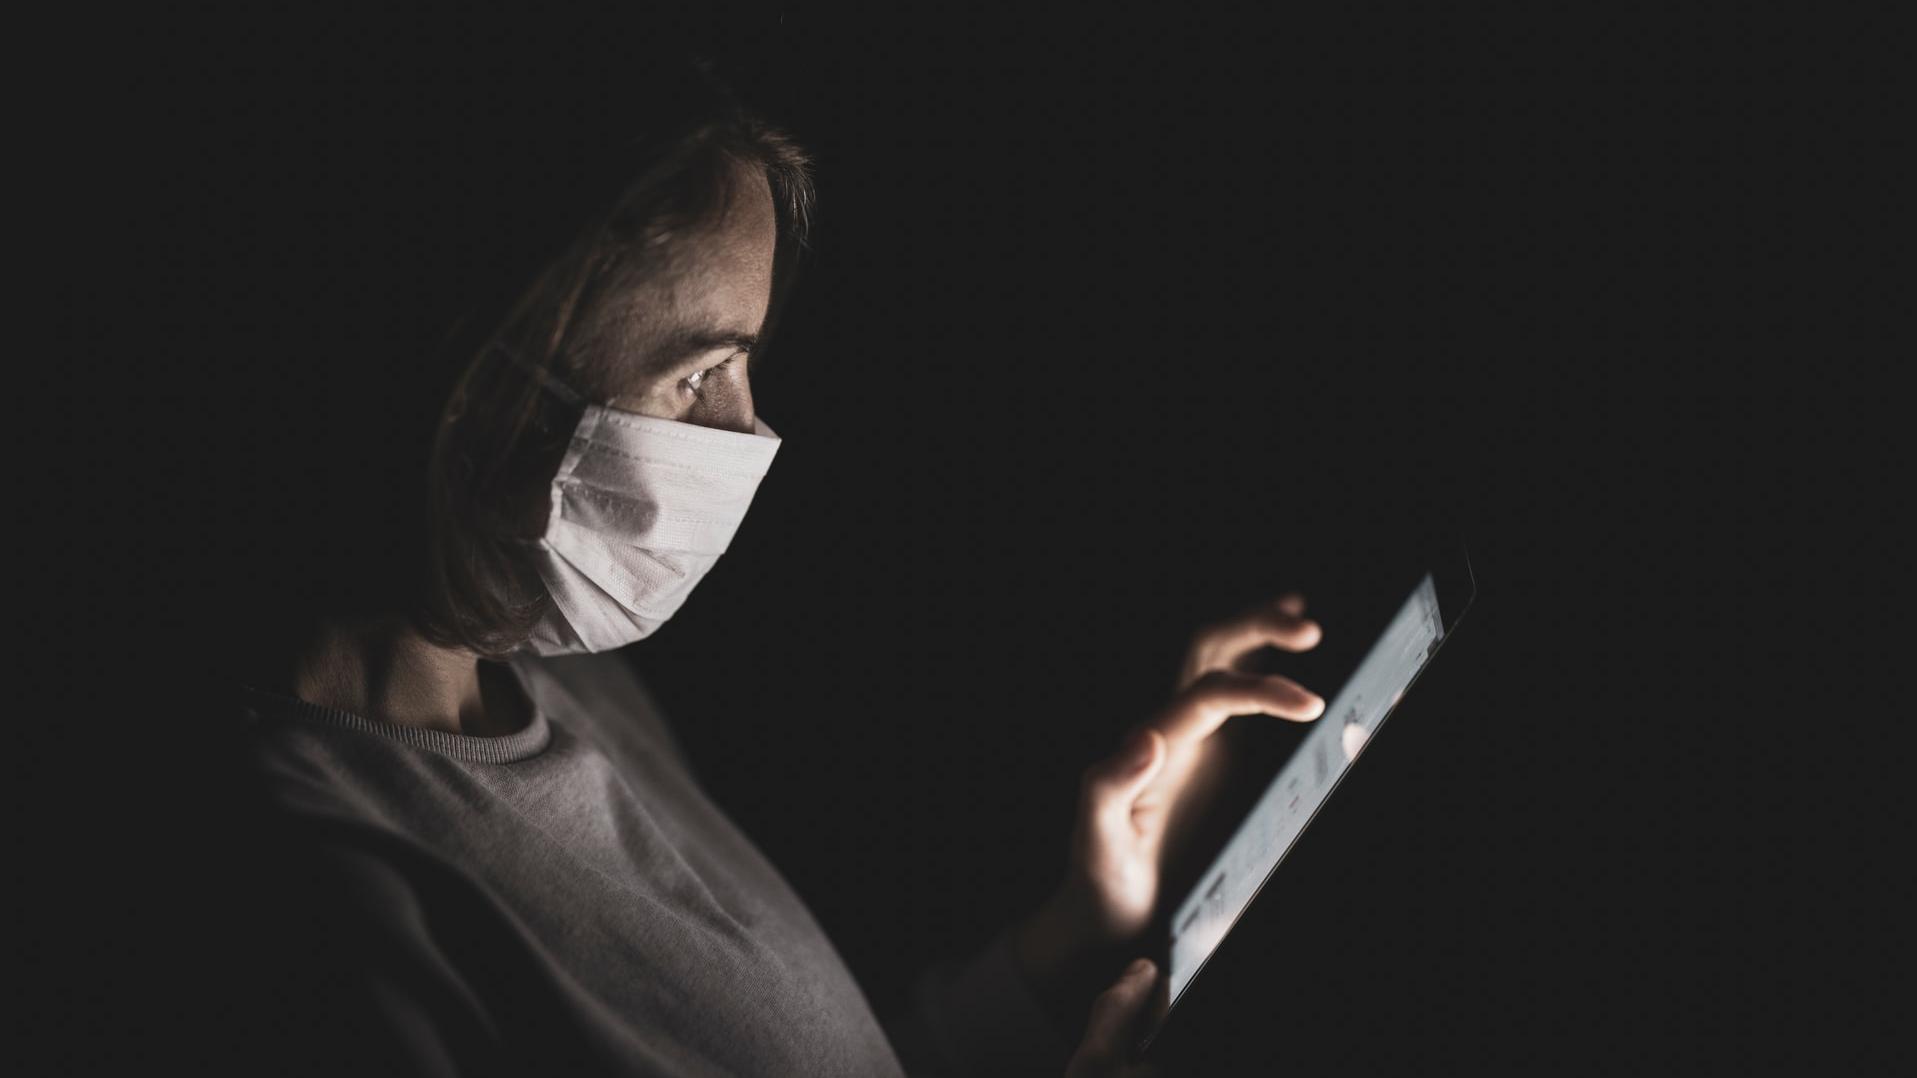 Image showing person wearing mask while using tablet